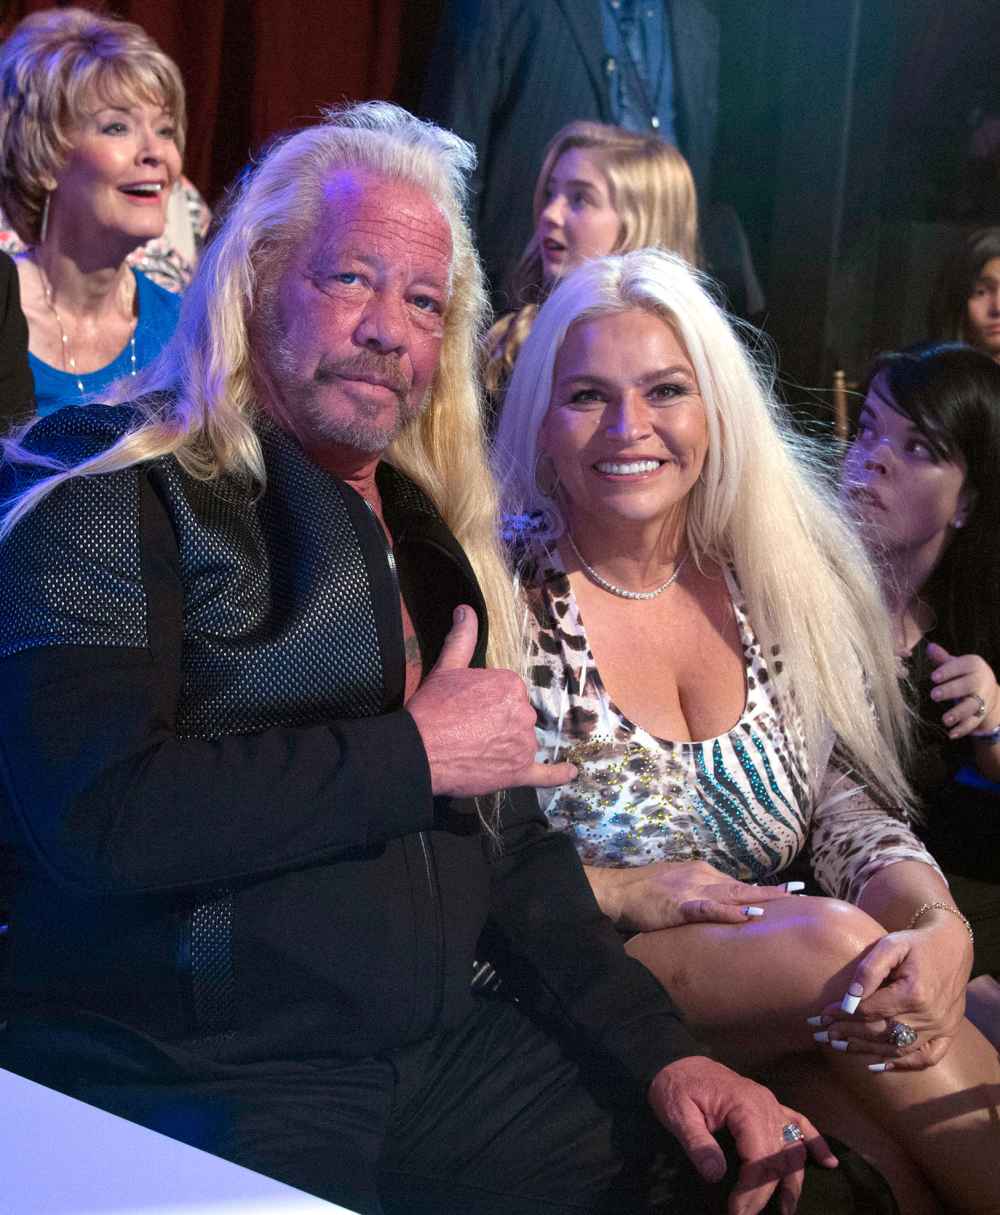 Dog the Bounty Hunter’s Late Wife Beth Chapman Honored at Emotional Hawaii Memorial Service